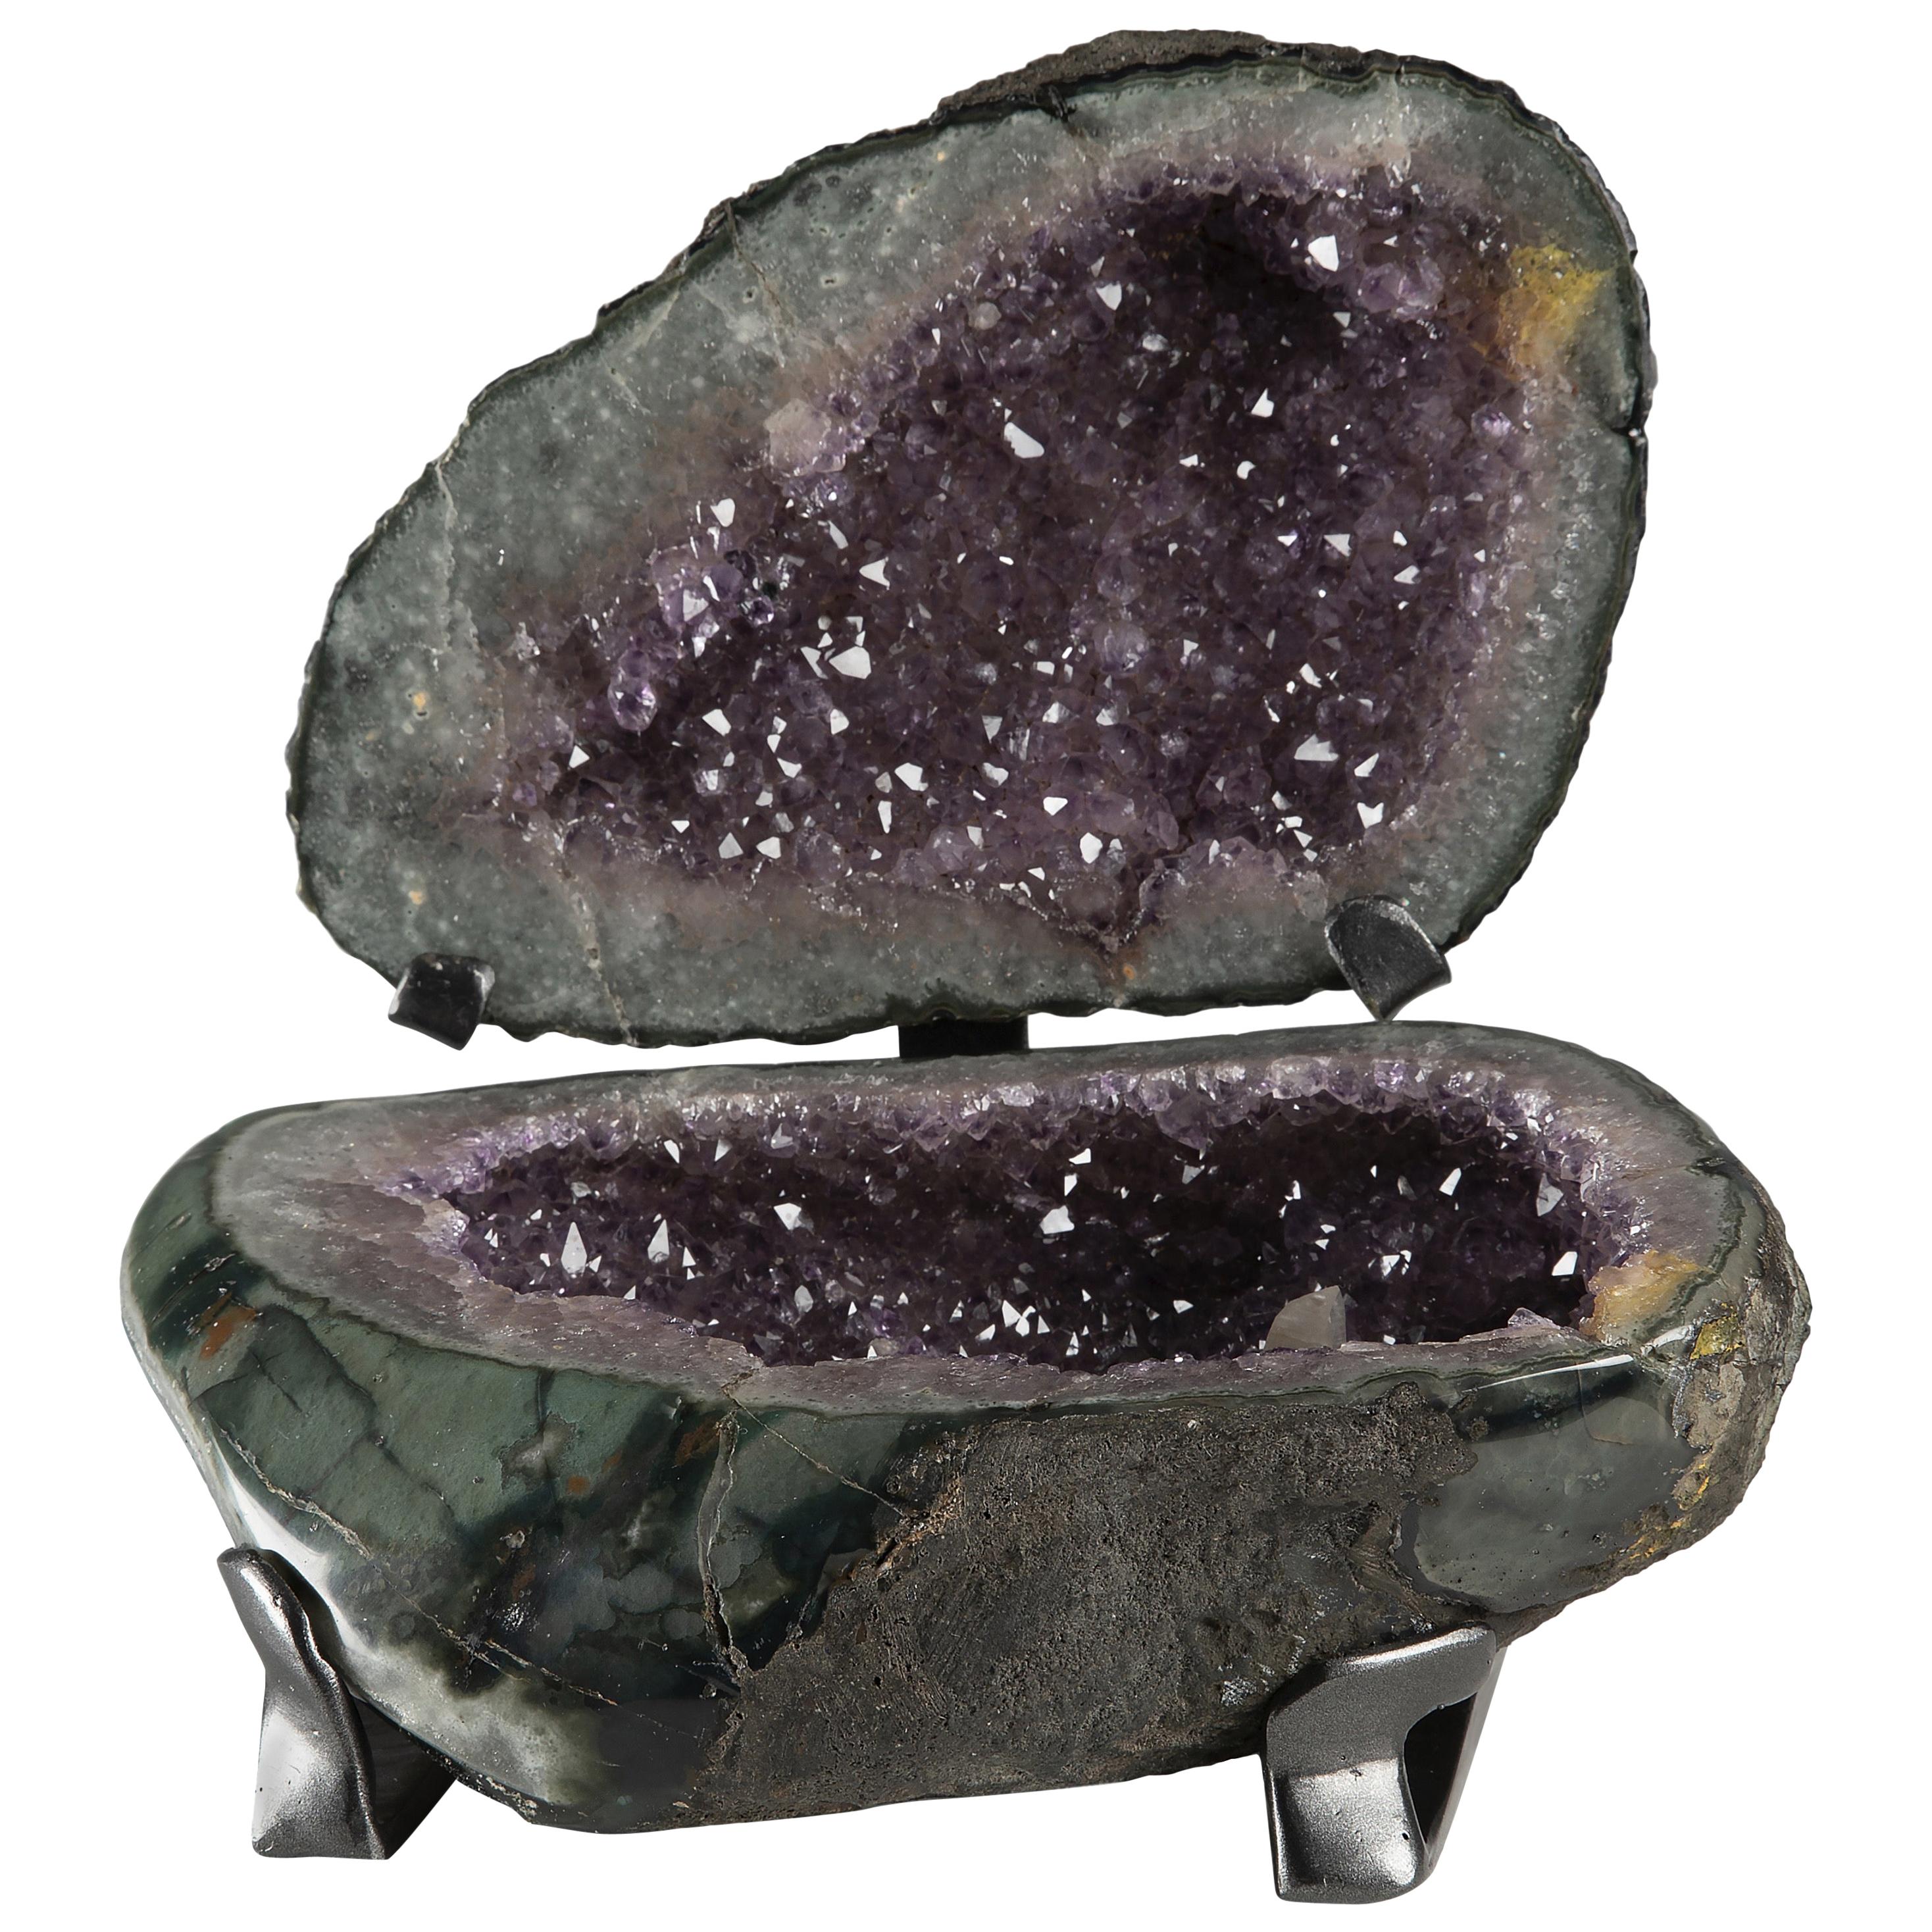 Geode Split in Two Amethyst Surrounded by White Quartz and a Calcite Formation